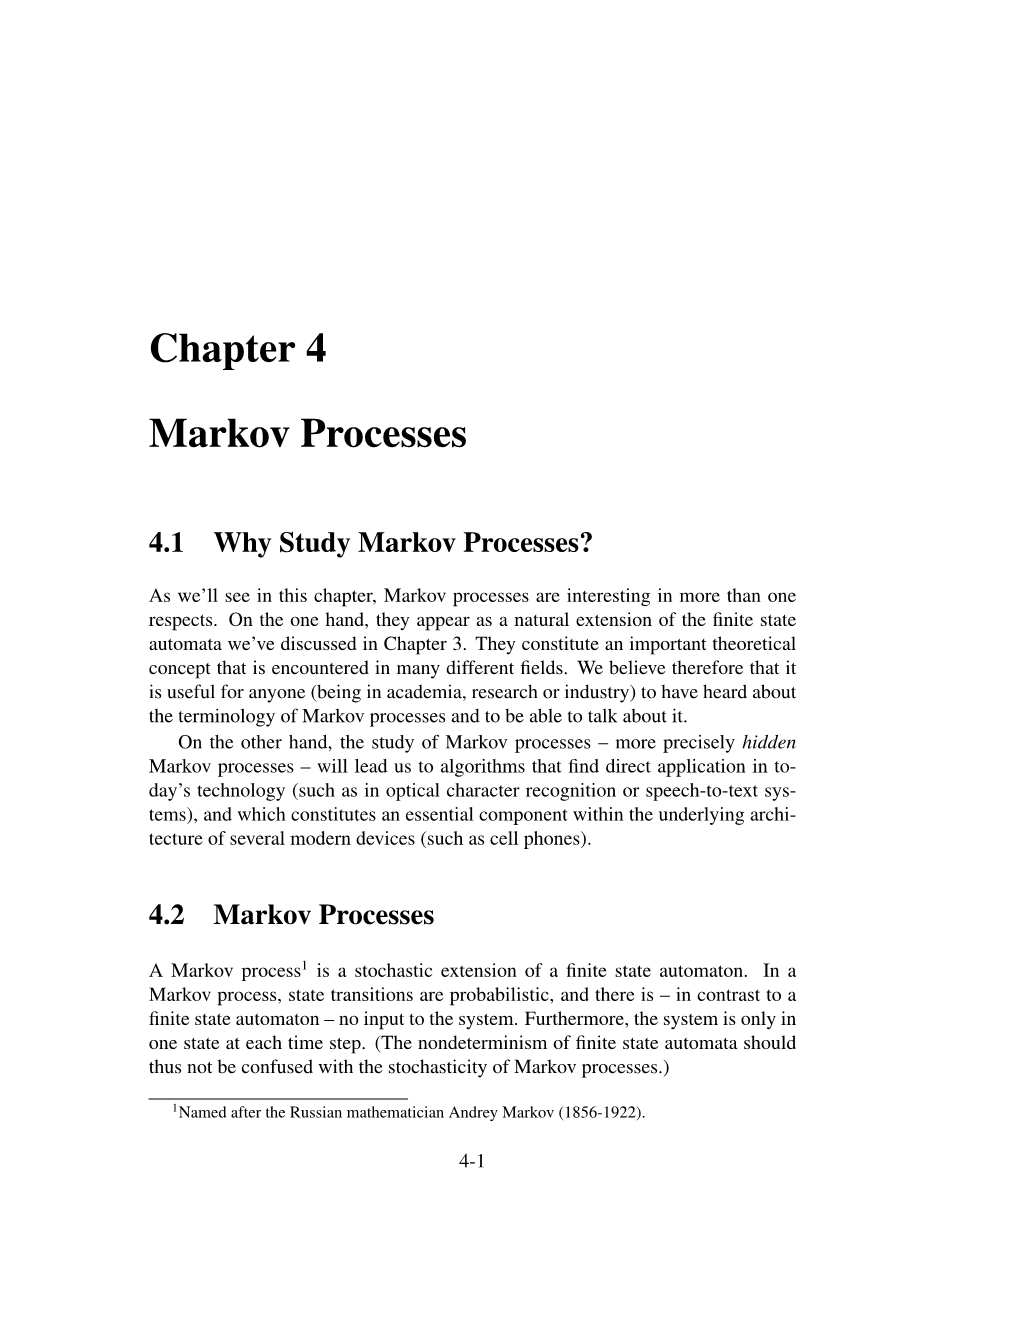 Chapter 4 Markov Processes